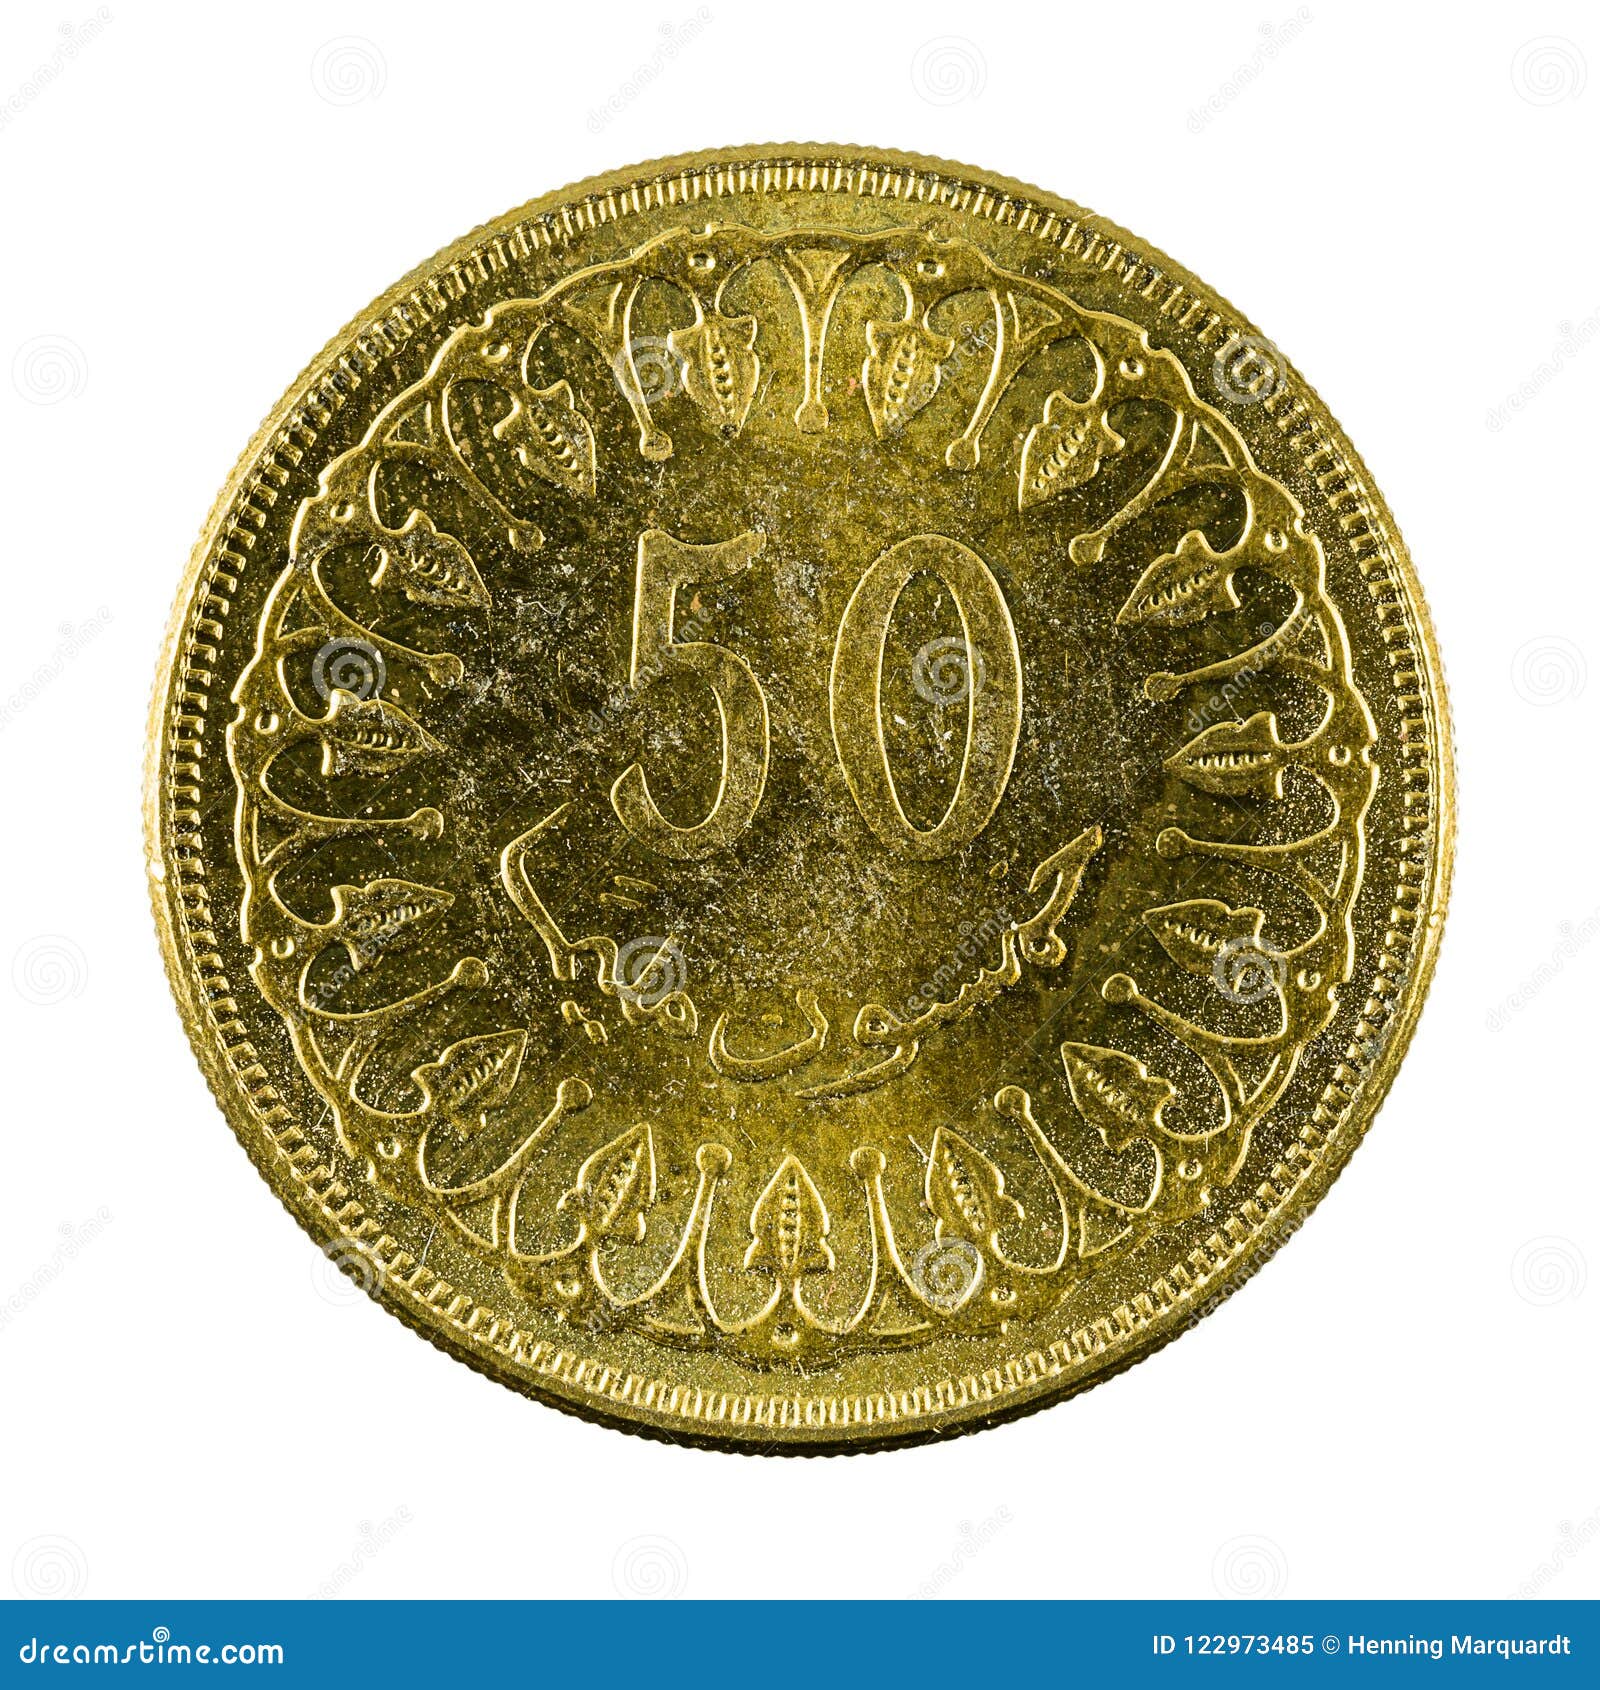 50 Tunisian Millimes Coin 2013 Isolated on White Background Stock Image ...